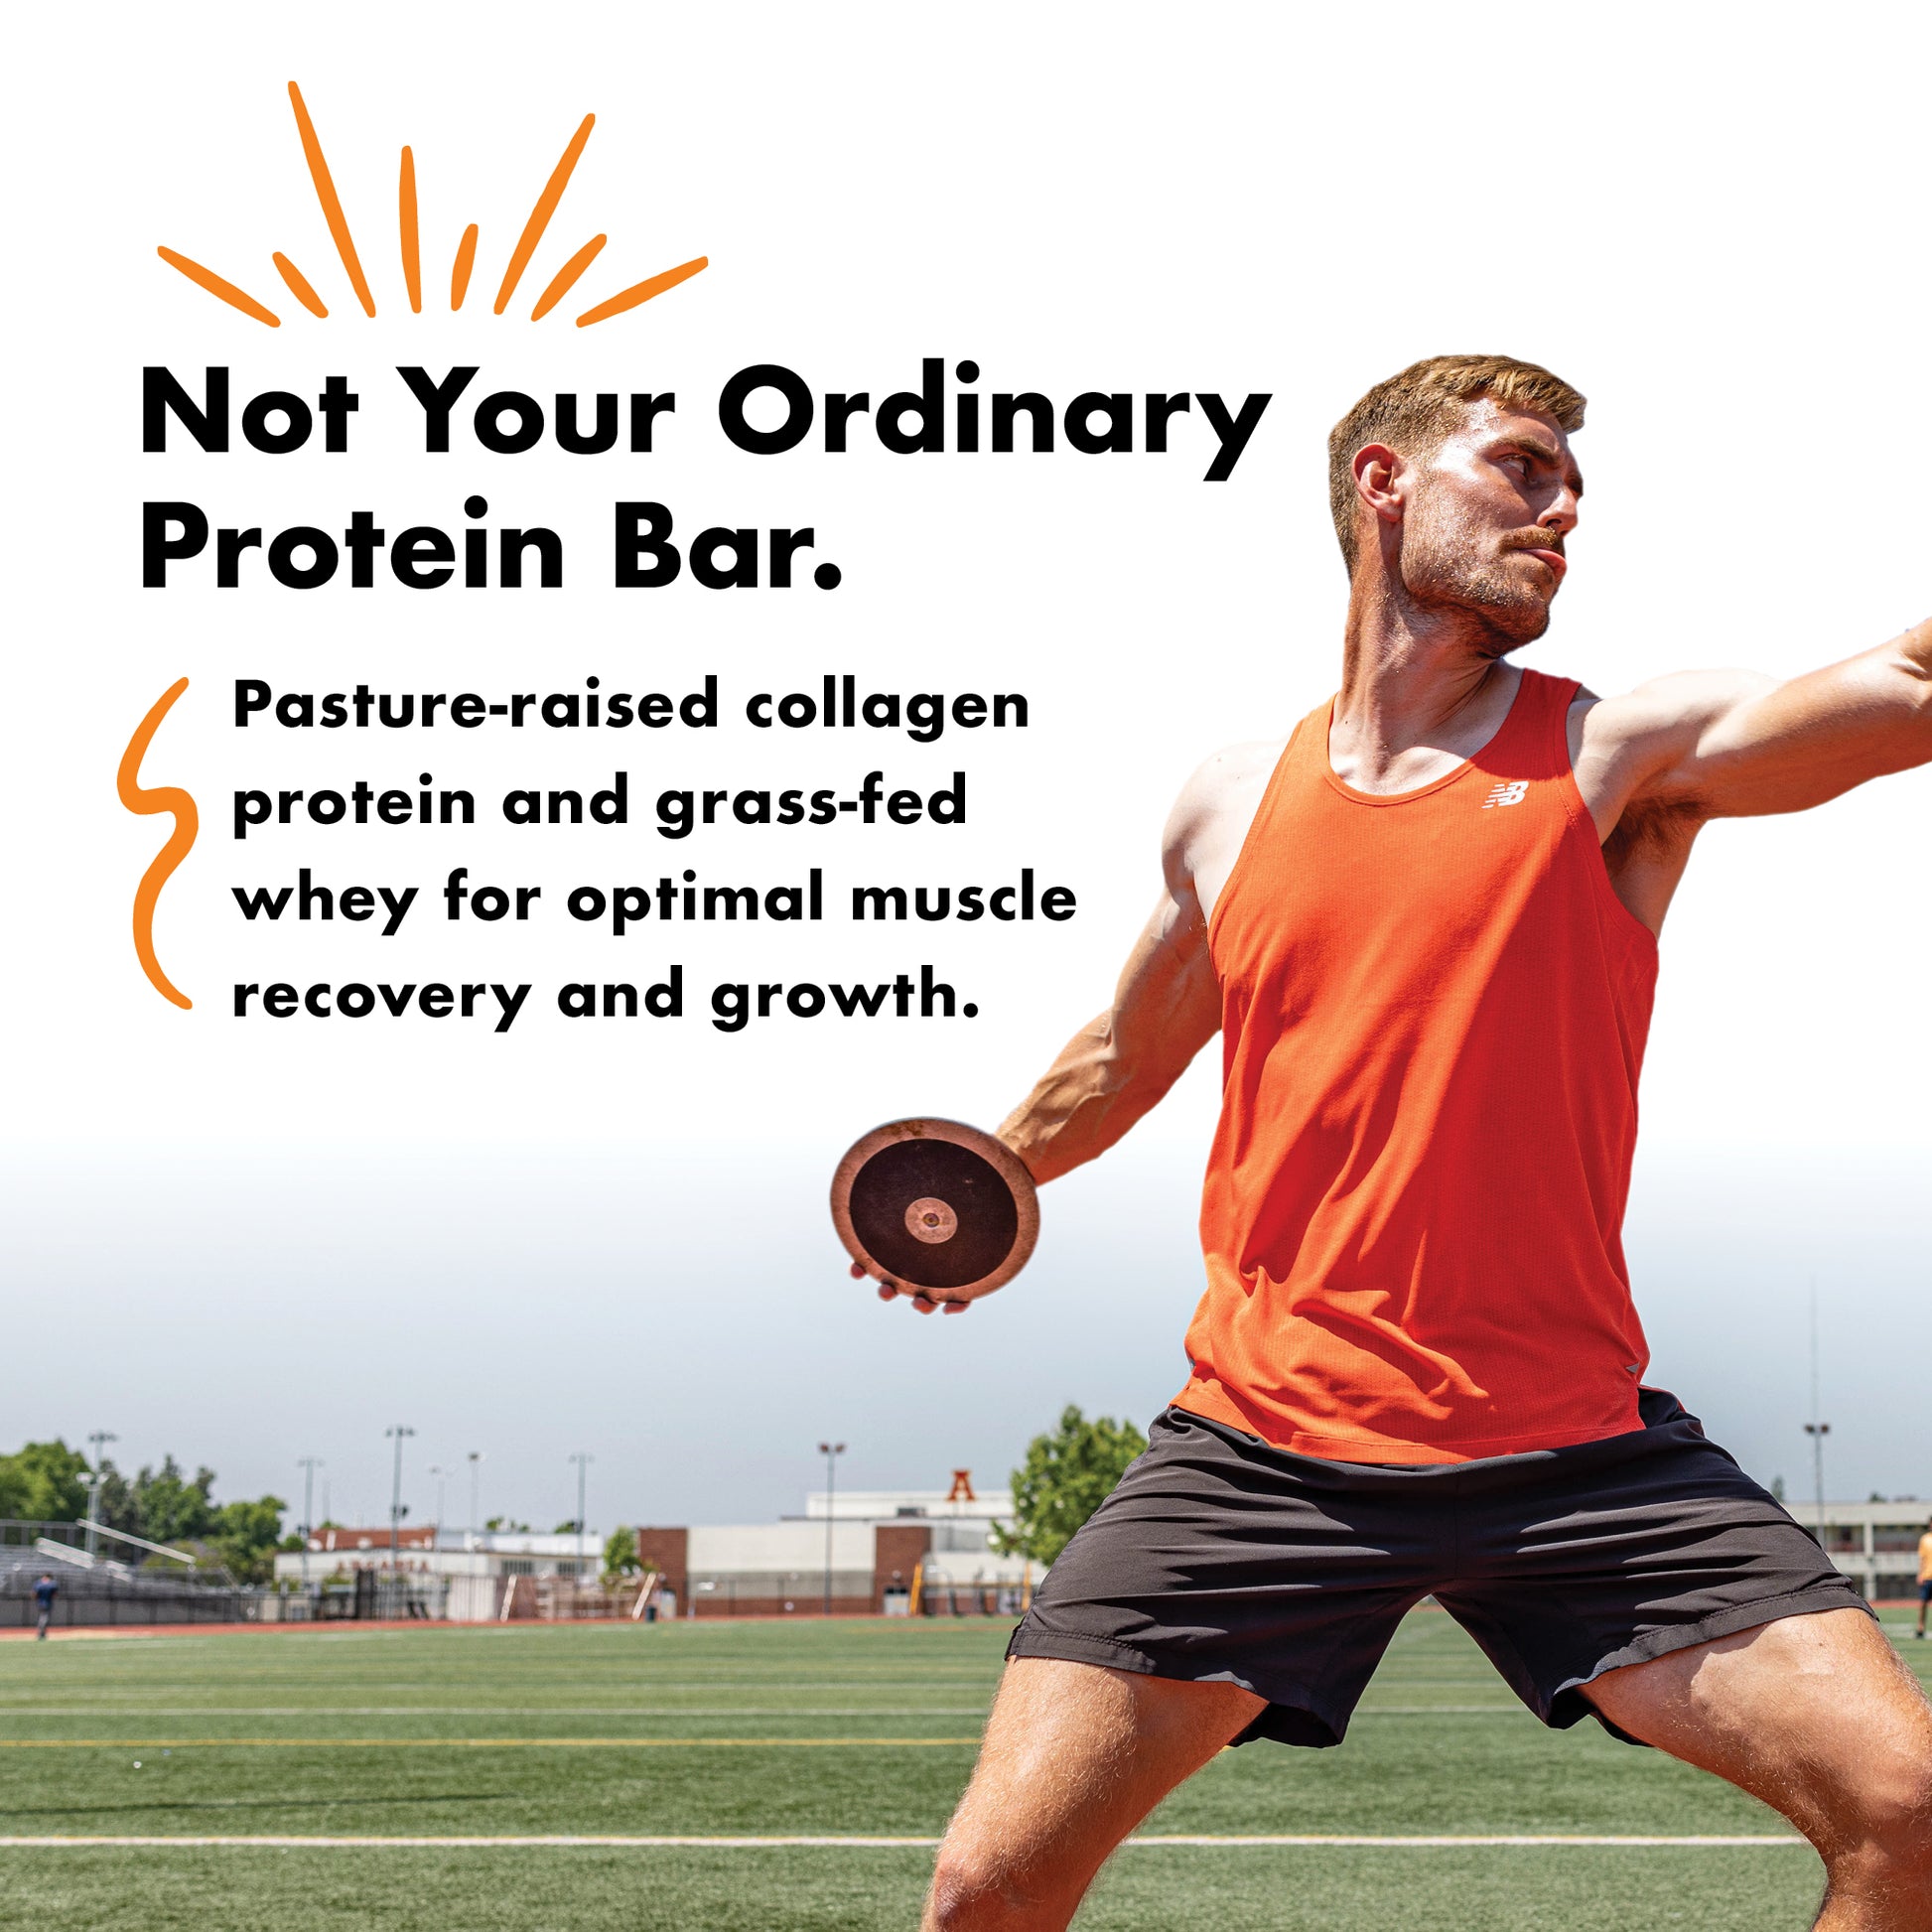 Not Your Ordinary Protein Bar - Pasture-raised collagen protein and grass-fed whey for optimal muscle recovery and growth.